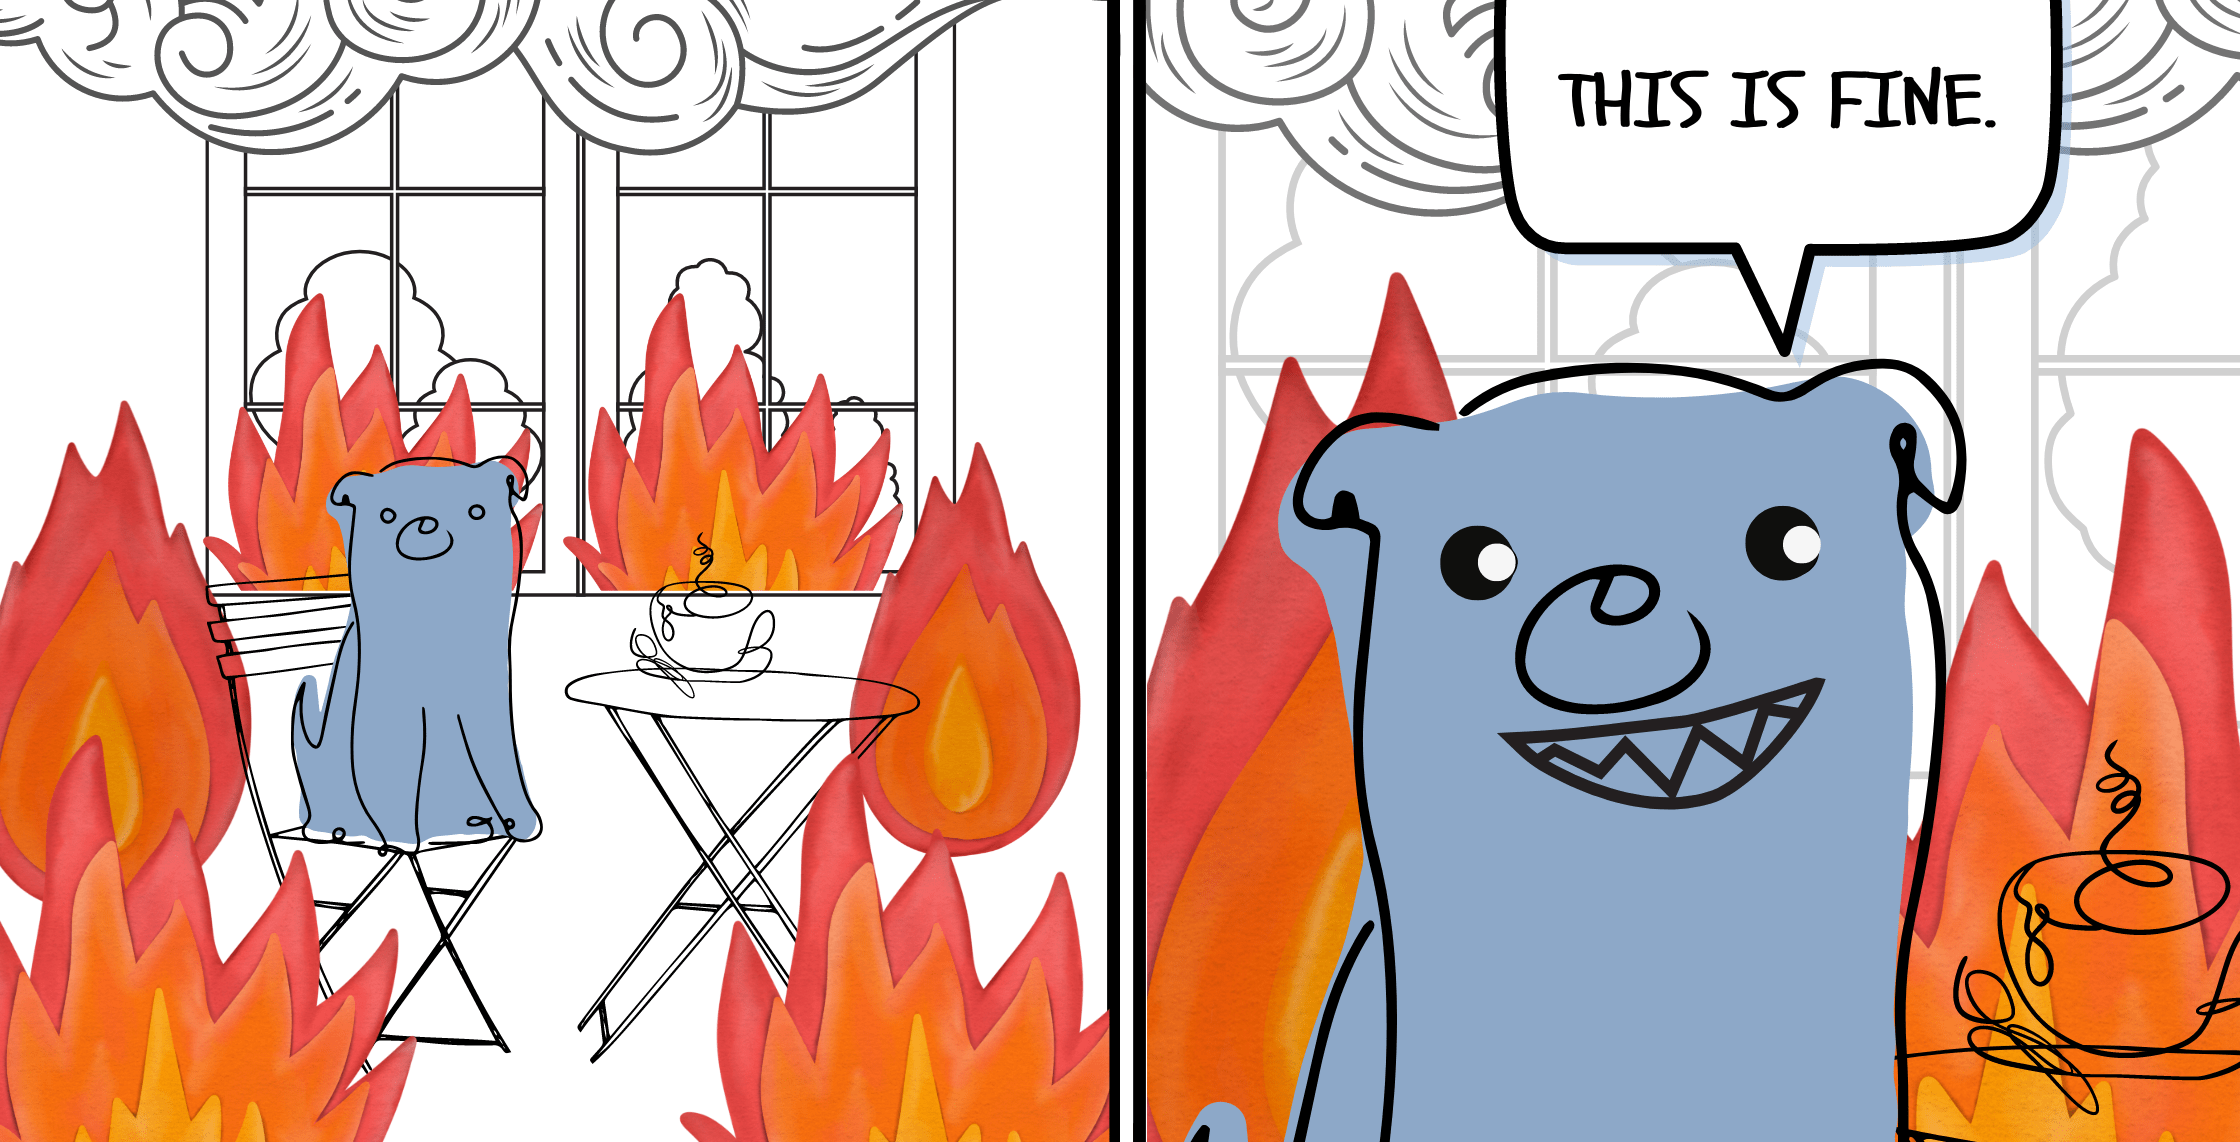 A two-panel image. First panel is a blue cartoon dog sitting with a cup of coffee in a living room that's on fire. The second panel is a close up of the blue dog surrounded by fire with the speech bubble that says, "This is fine."